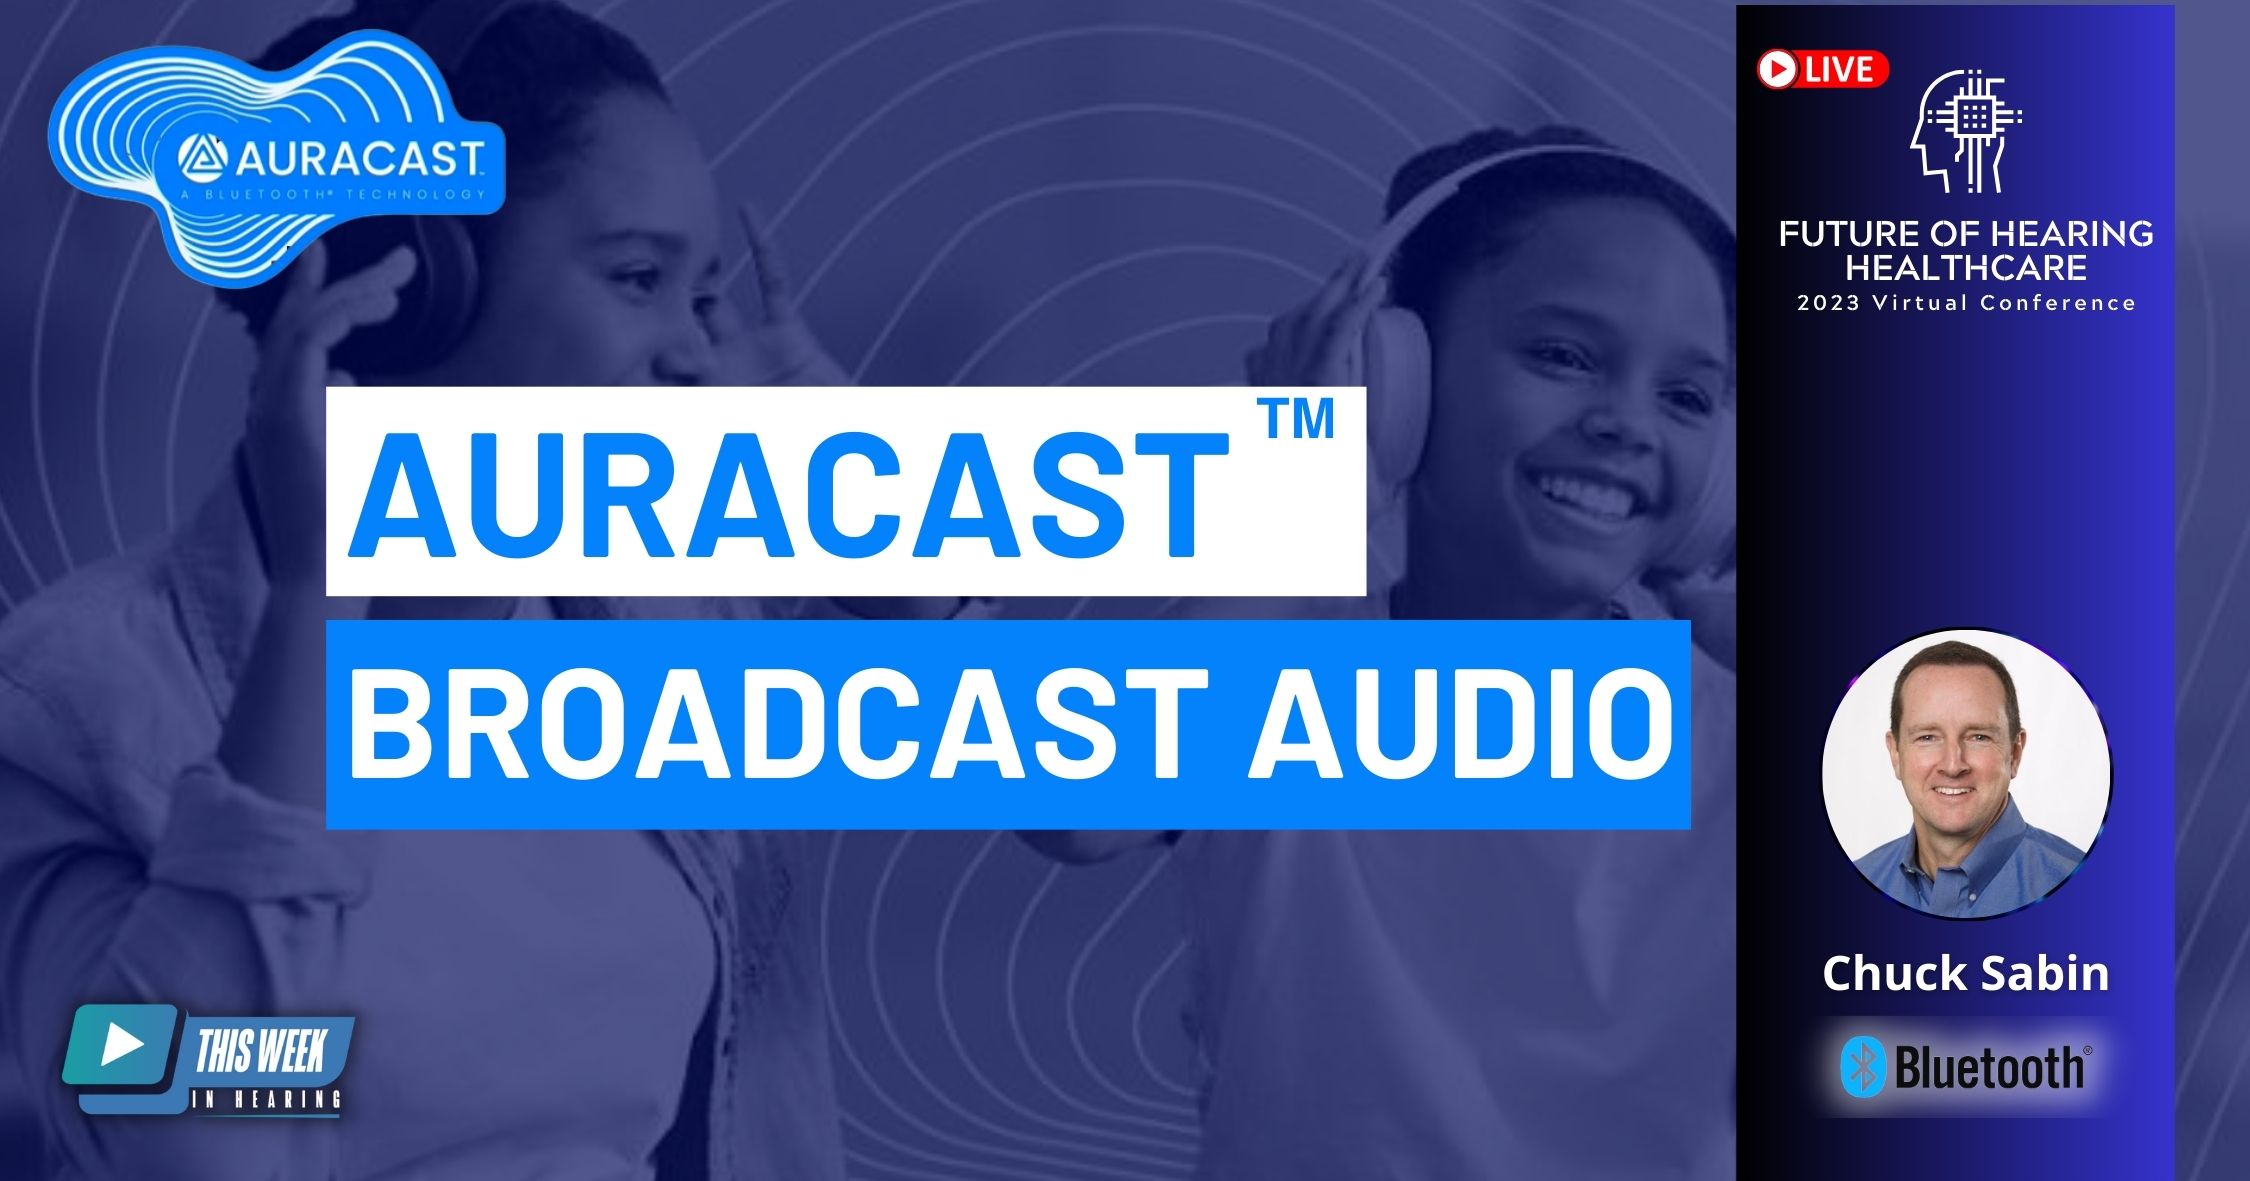 Featured image for “What you need to know about Auracast broadcast audio from Bluetooth”